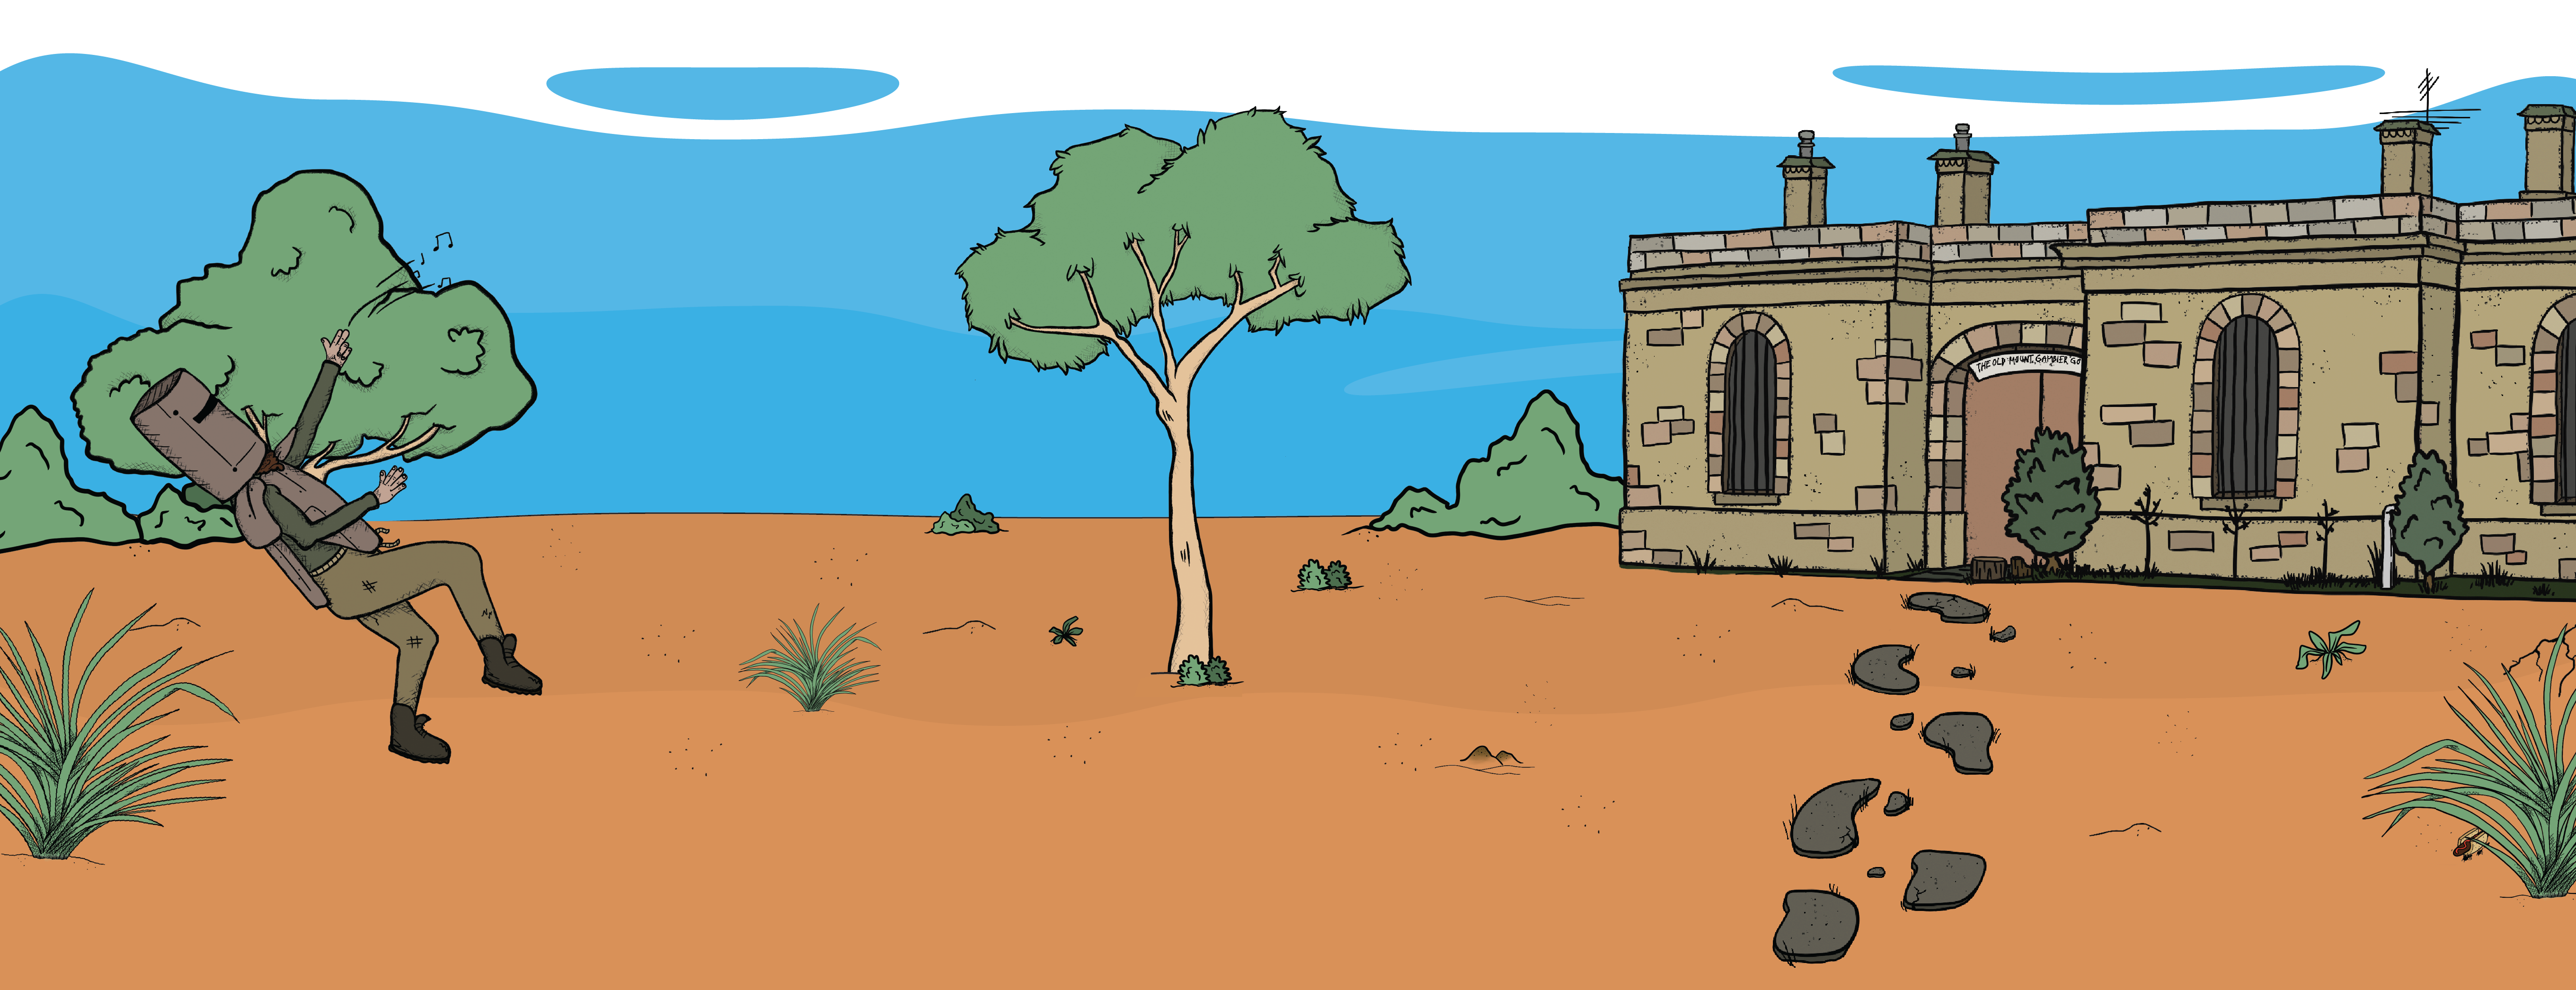 Illustrated image of Australian outback with Ned Kelly shooting a finger-gun, native flora and the Old Mt Gambier Gaol